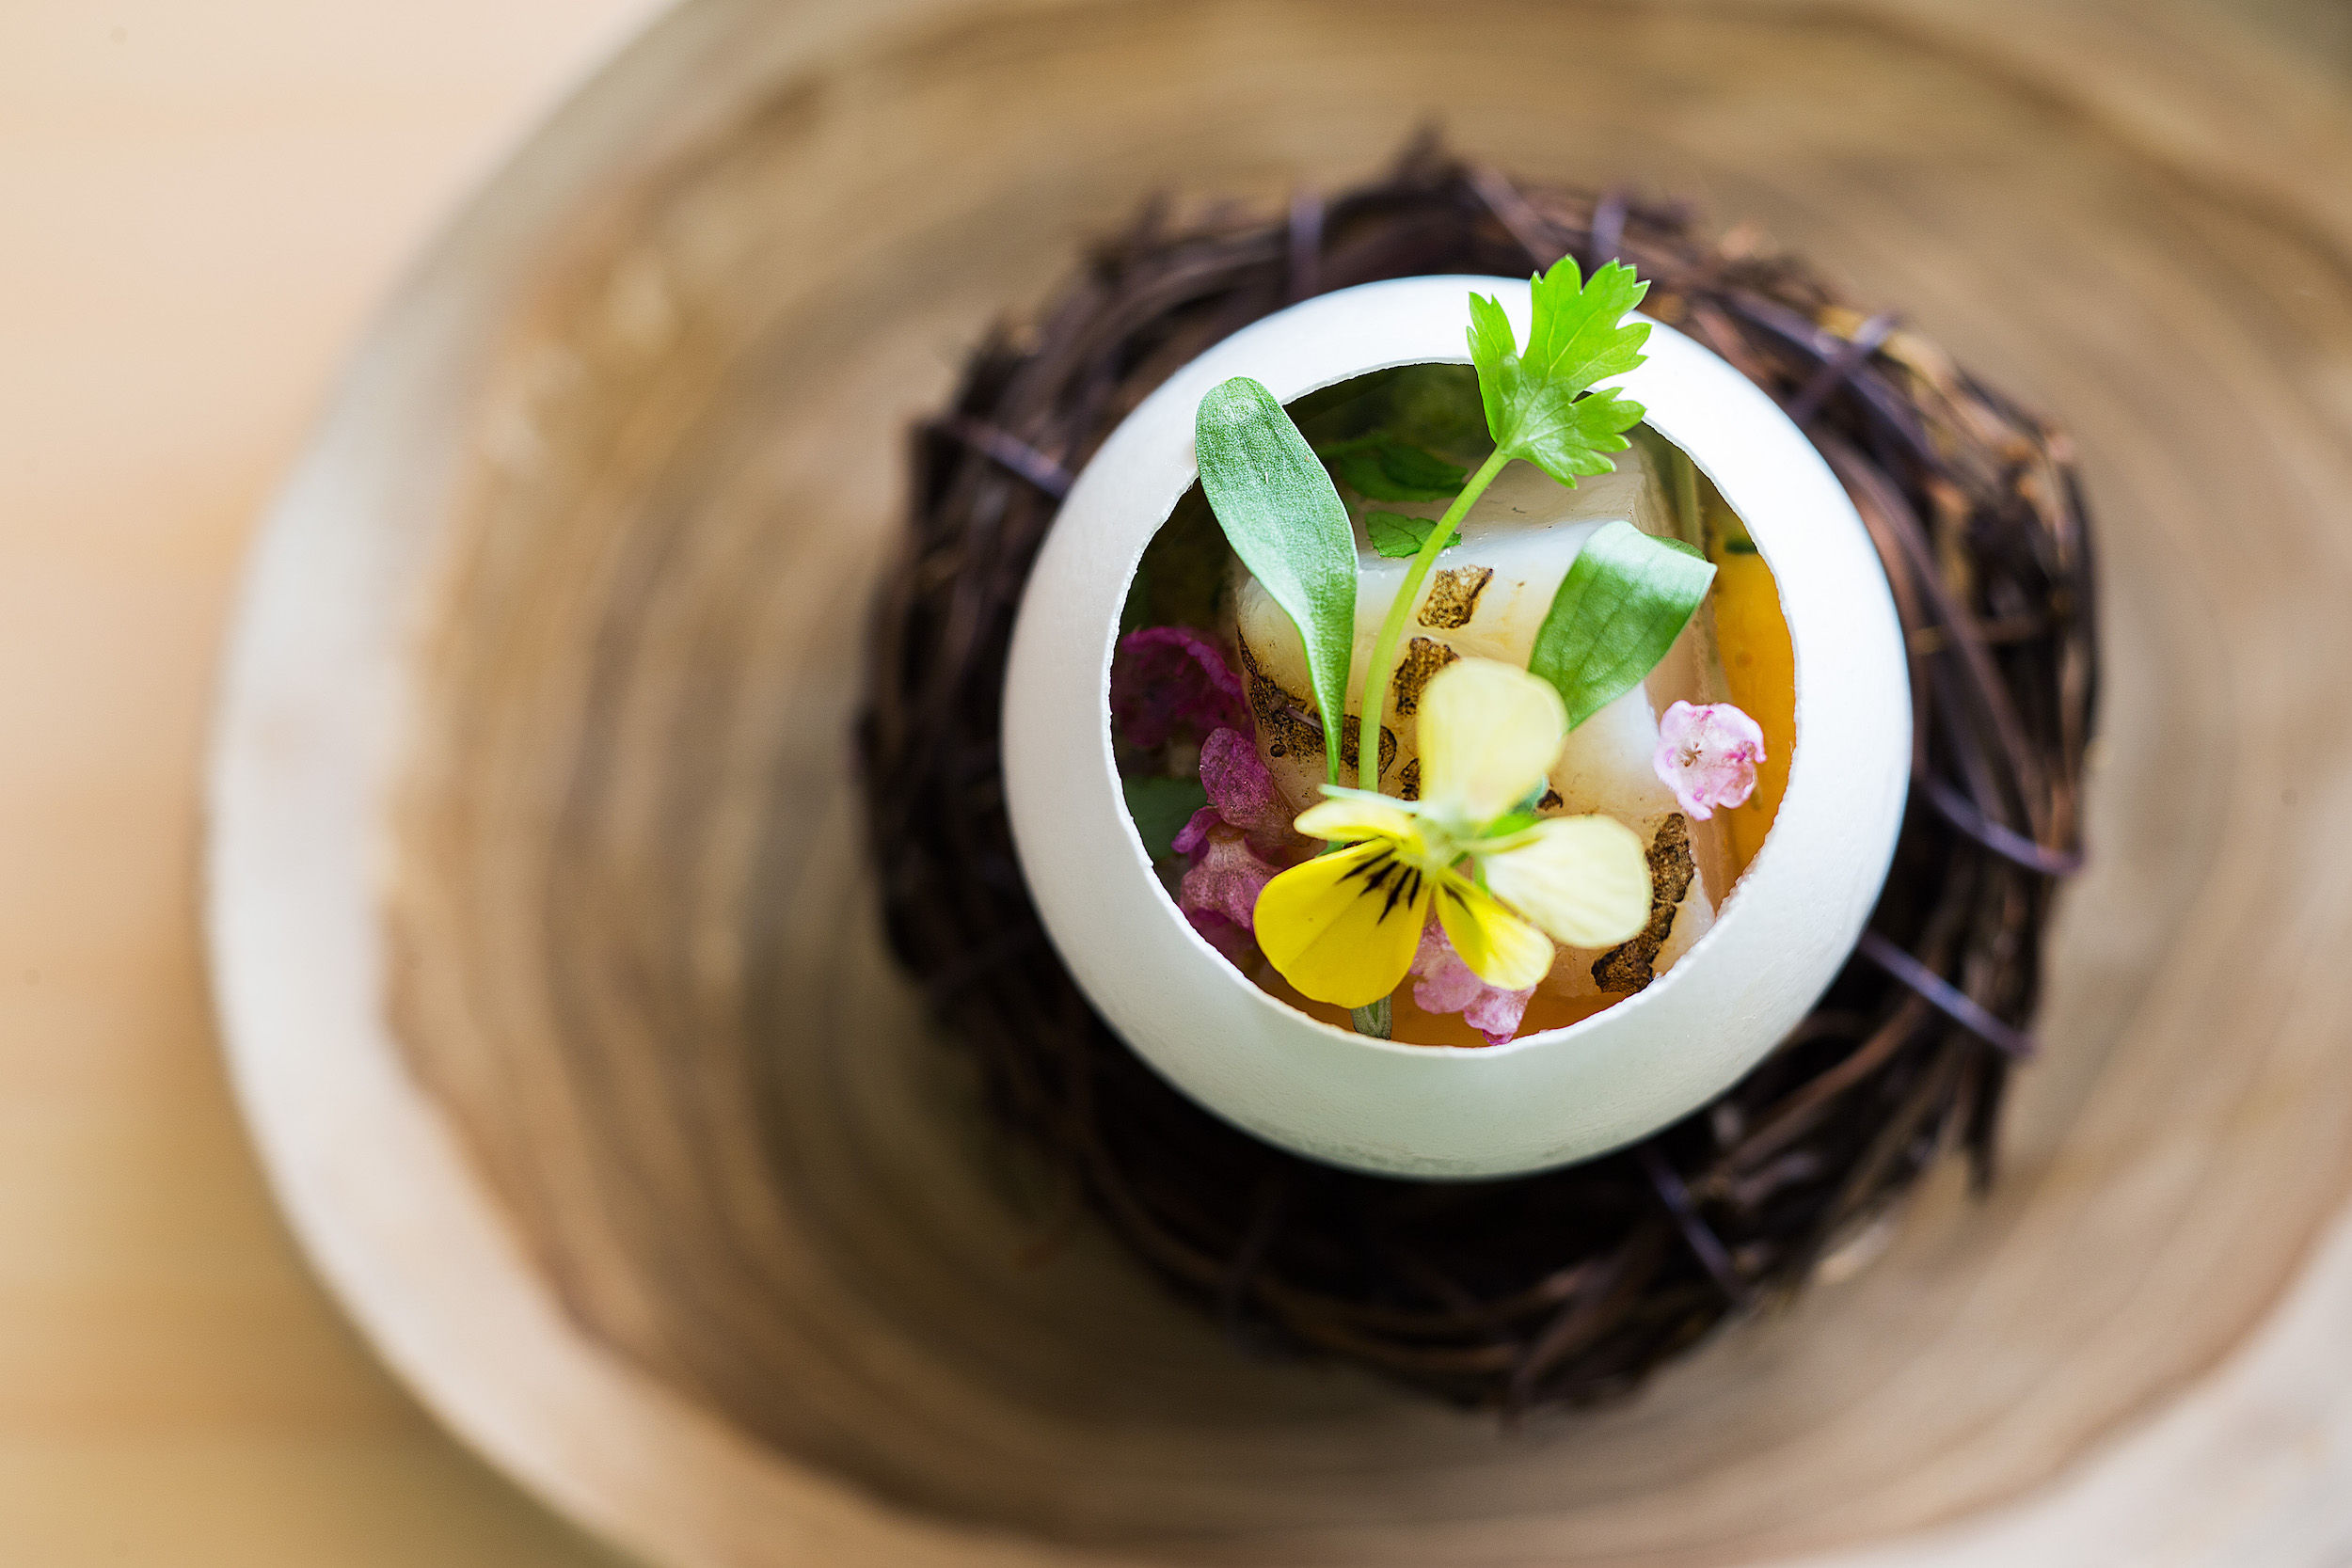 10 new Hong Kong restaurants to try this June